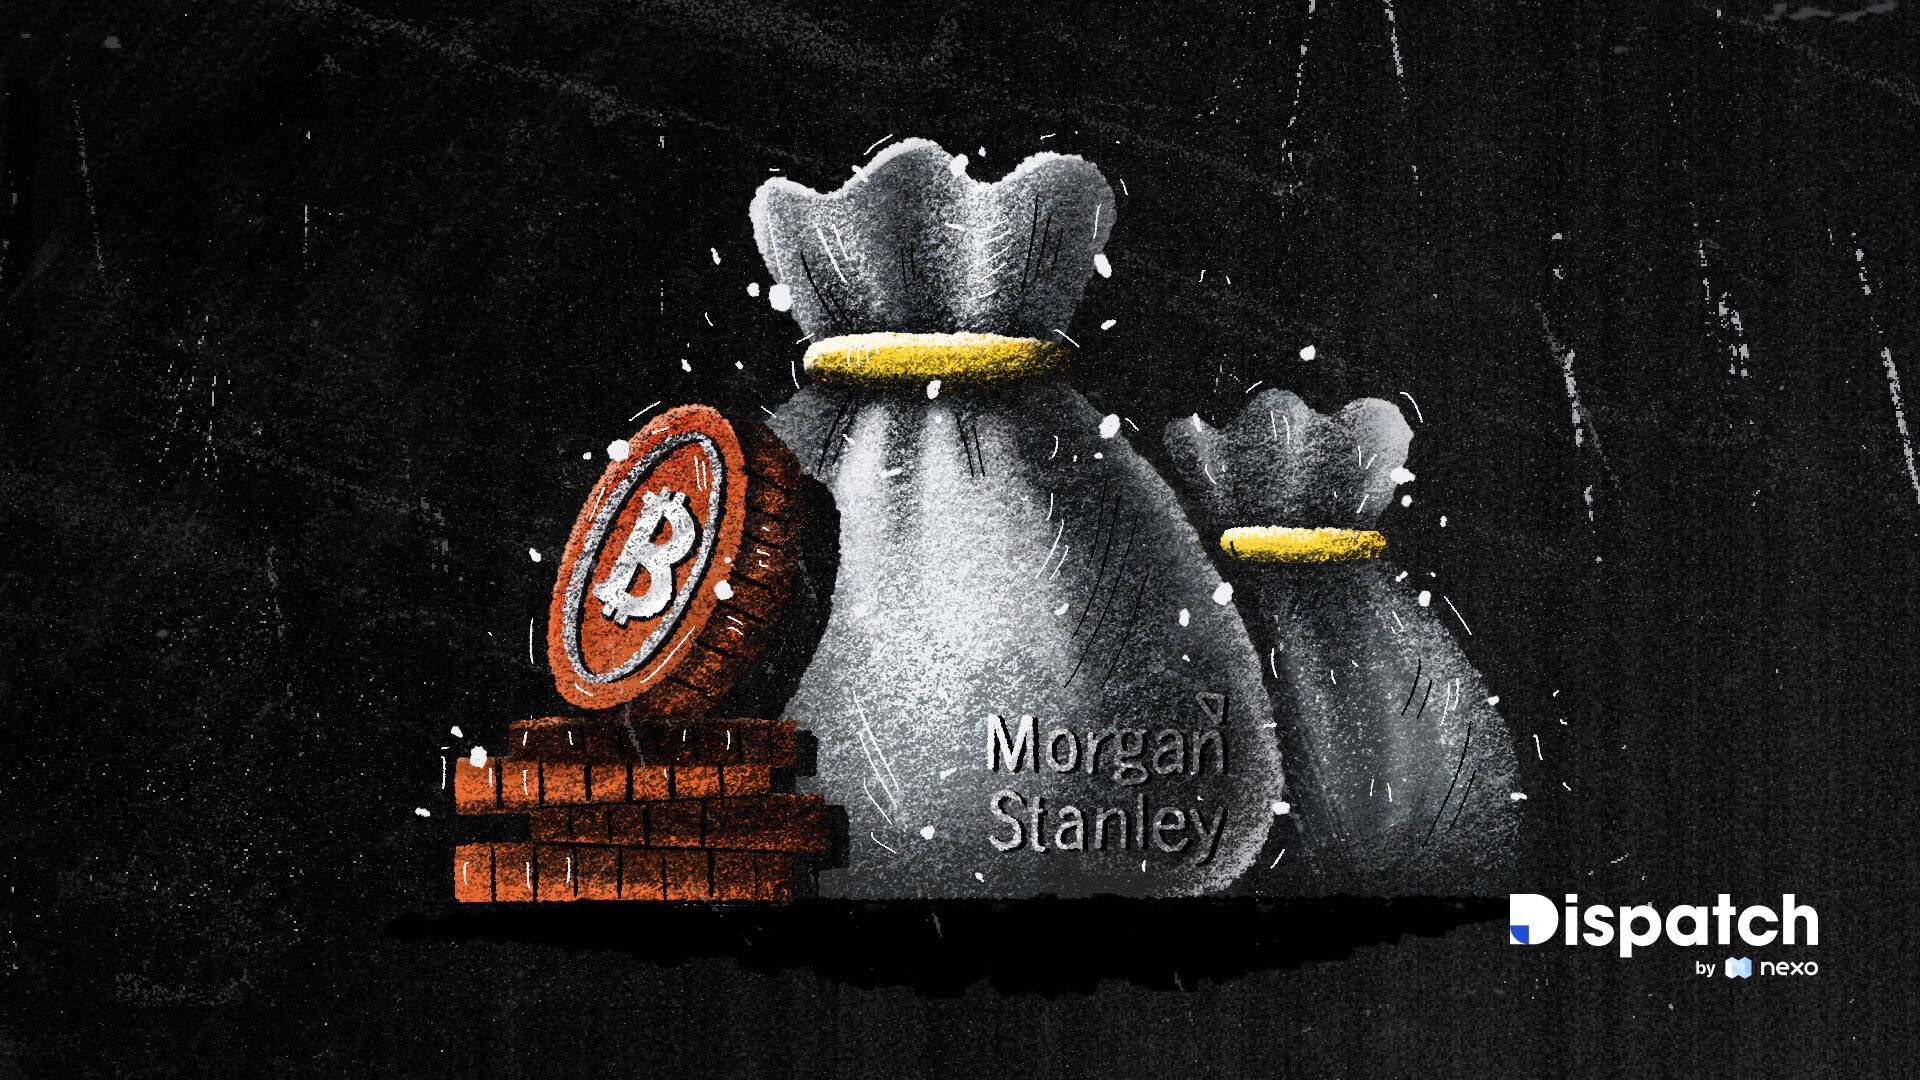 Dispatch #27: Morgan Stanley Bets Wealthy Clients Want Bitcoin